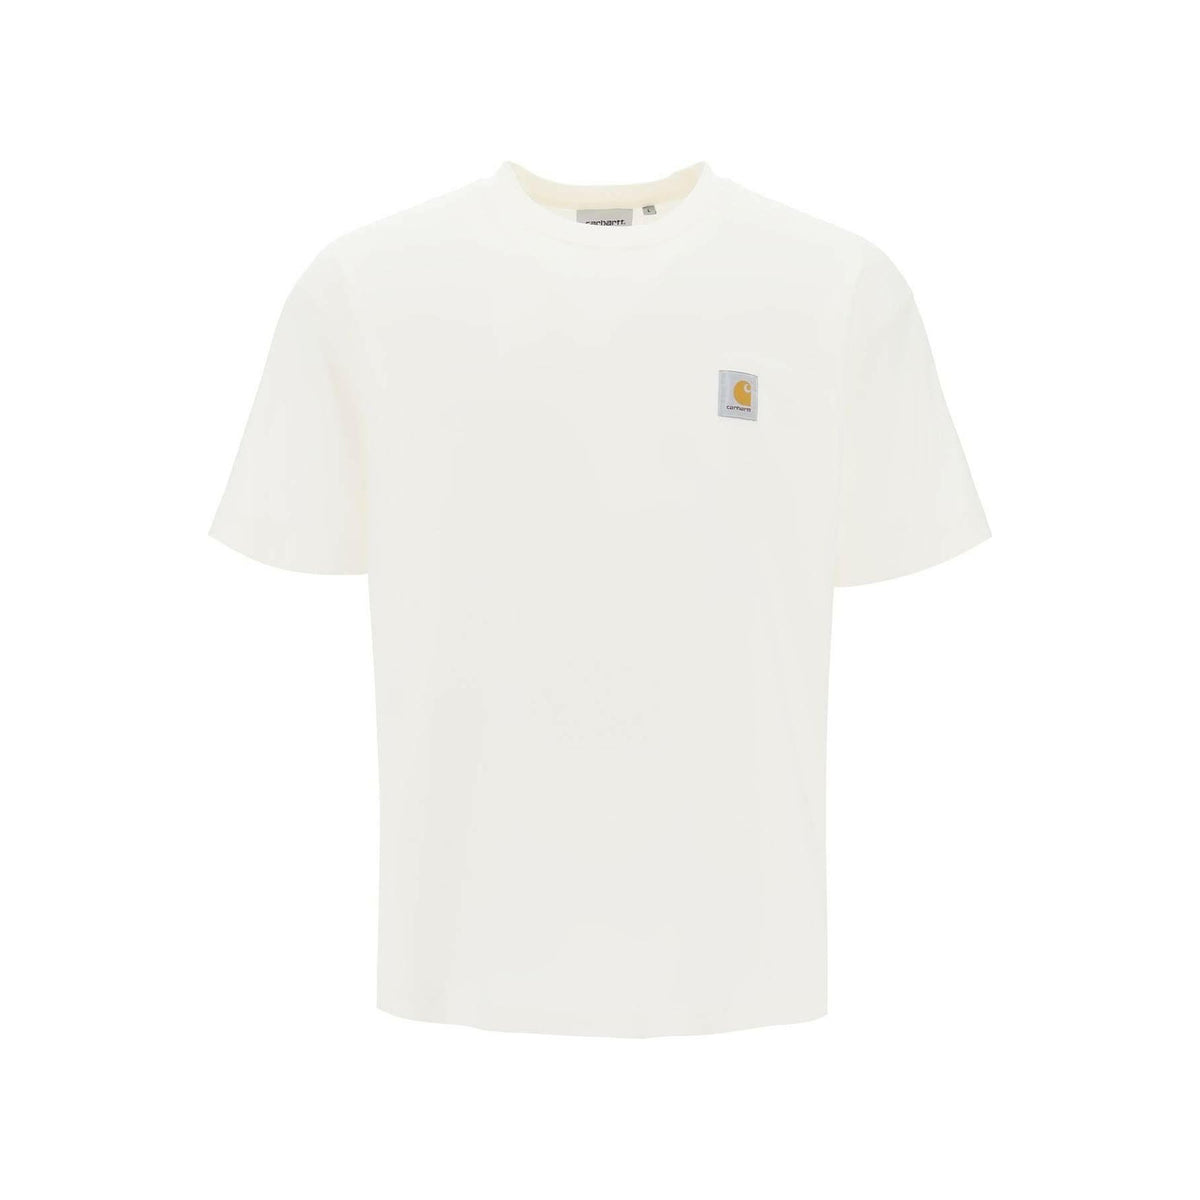 Wax White Cotton Jersey T-Shirt With Lived-In Look CARHARTT WIP JOHN JULIA.